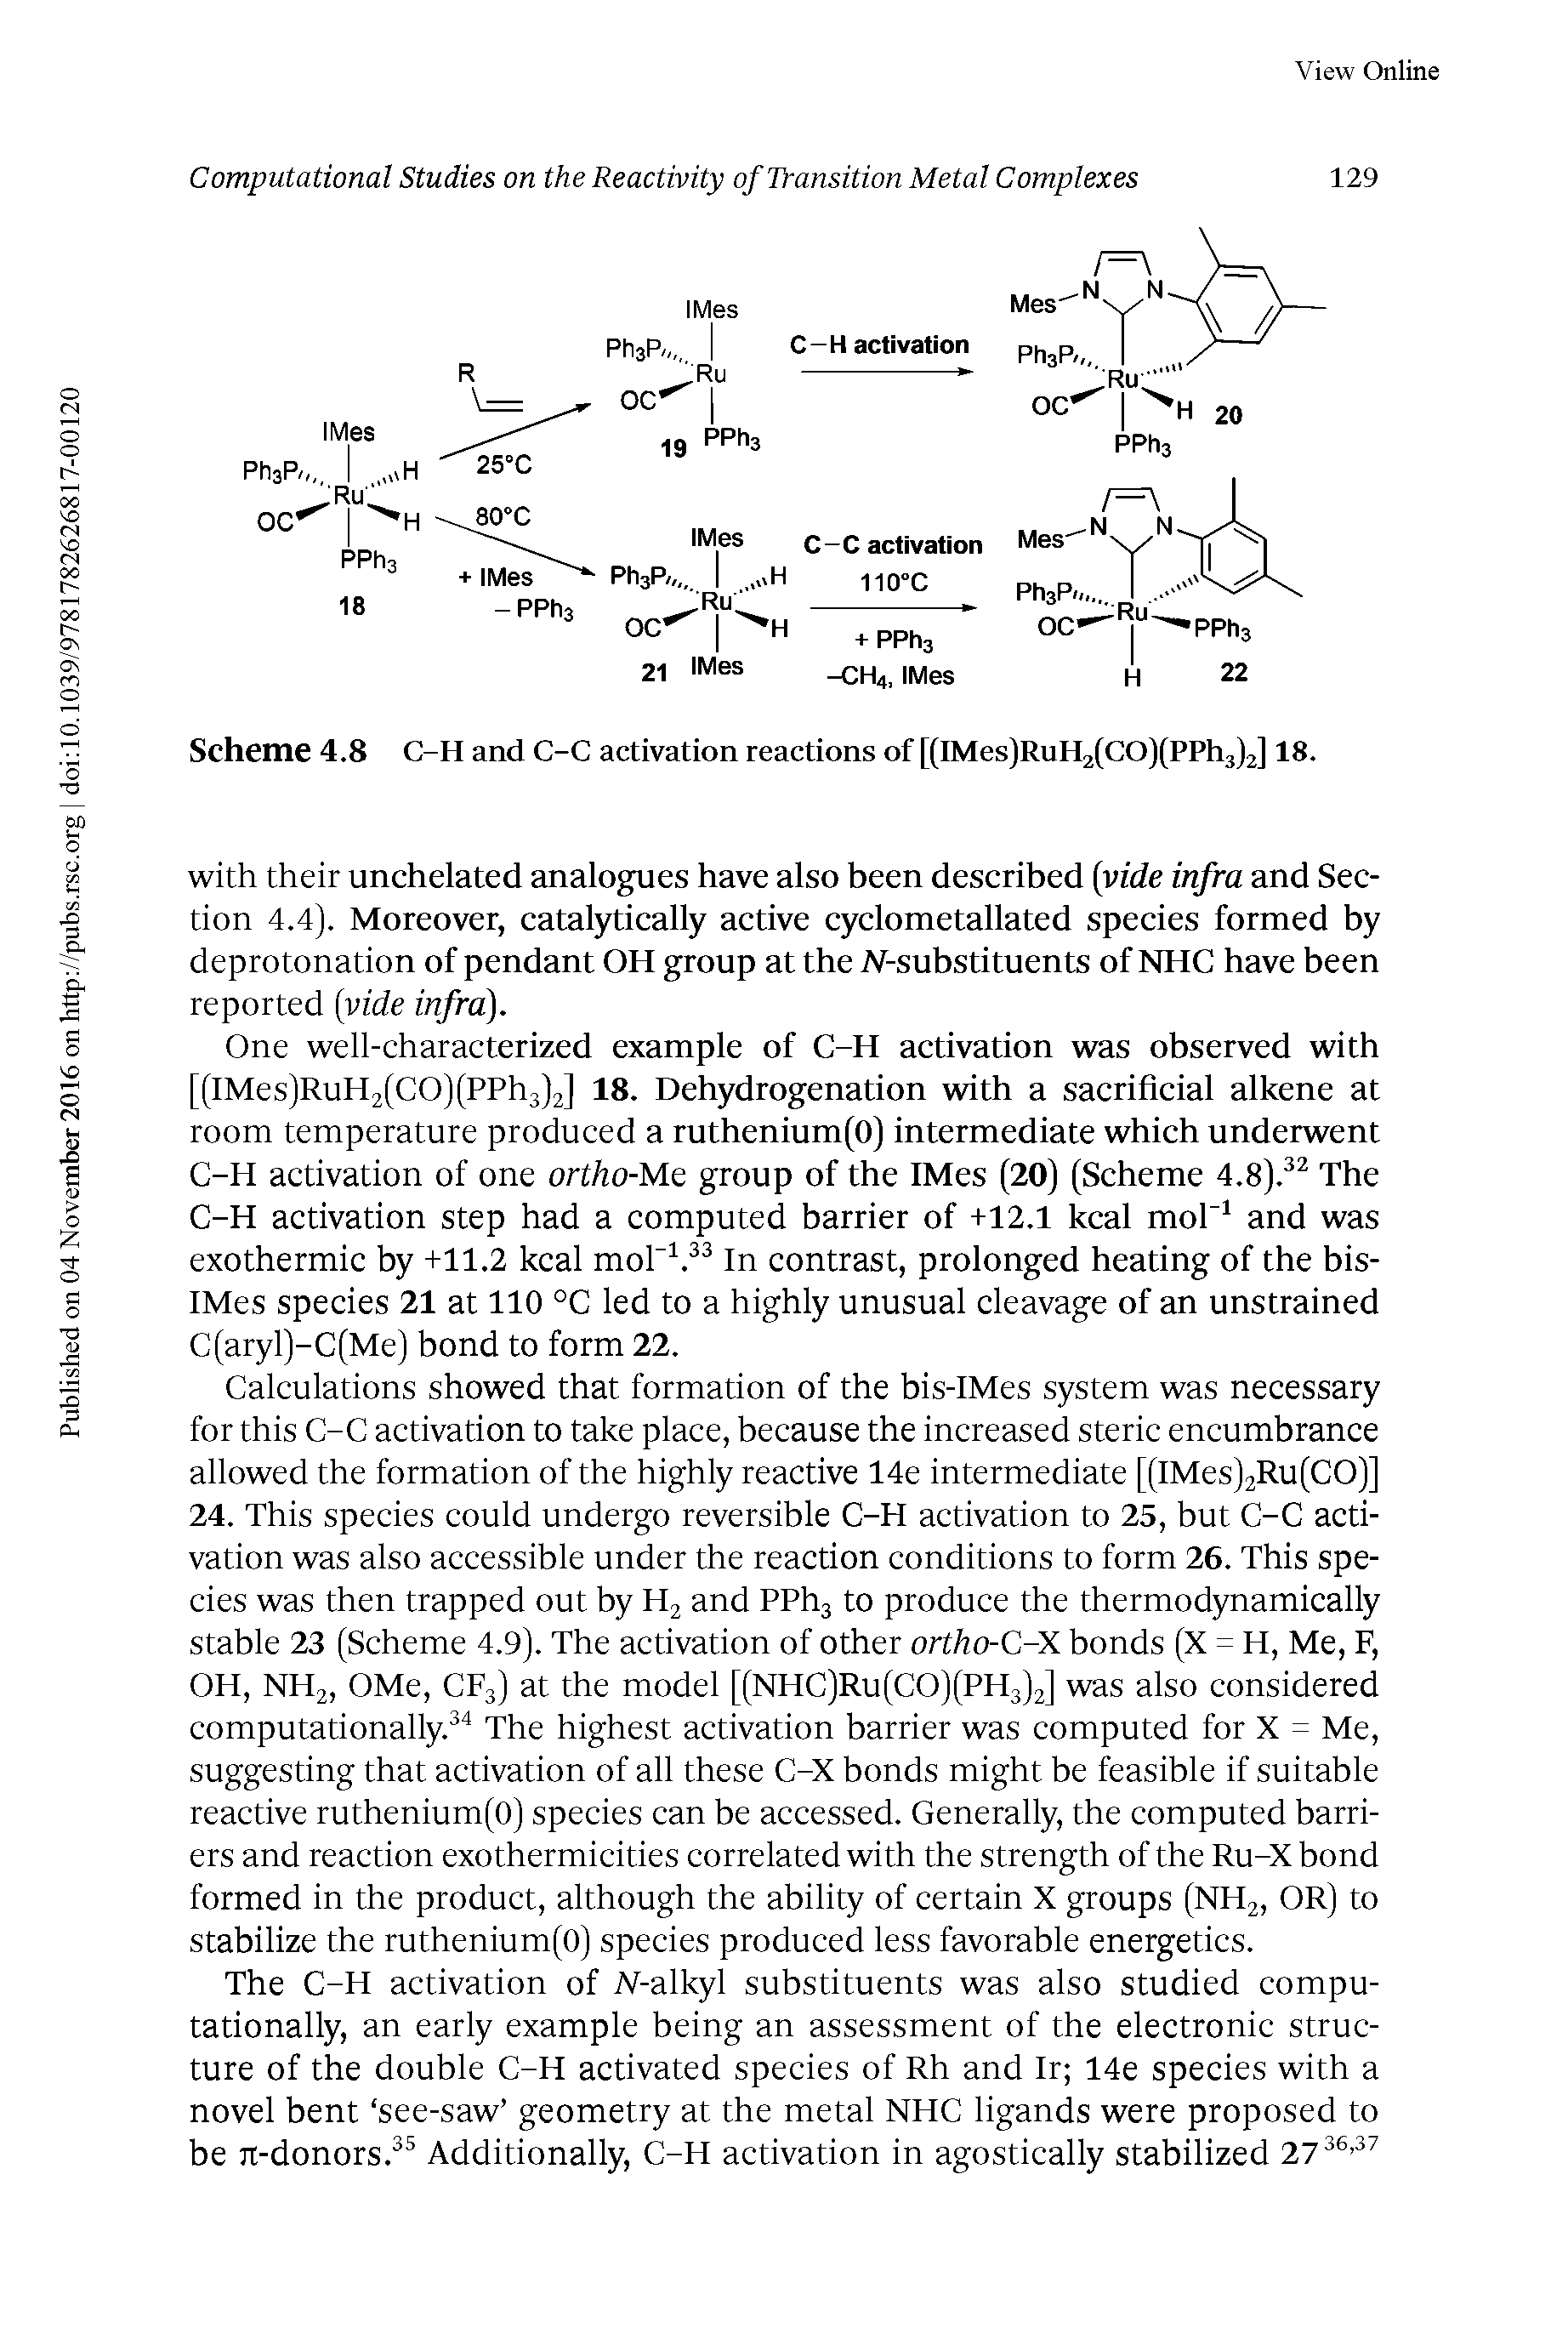 Scheme 4.8 C-H and C-C activation reactions of [(IMes)RuH2(CO)(PPh3)2] 18.